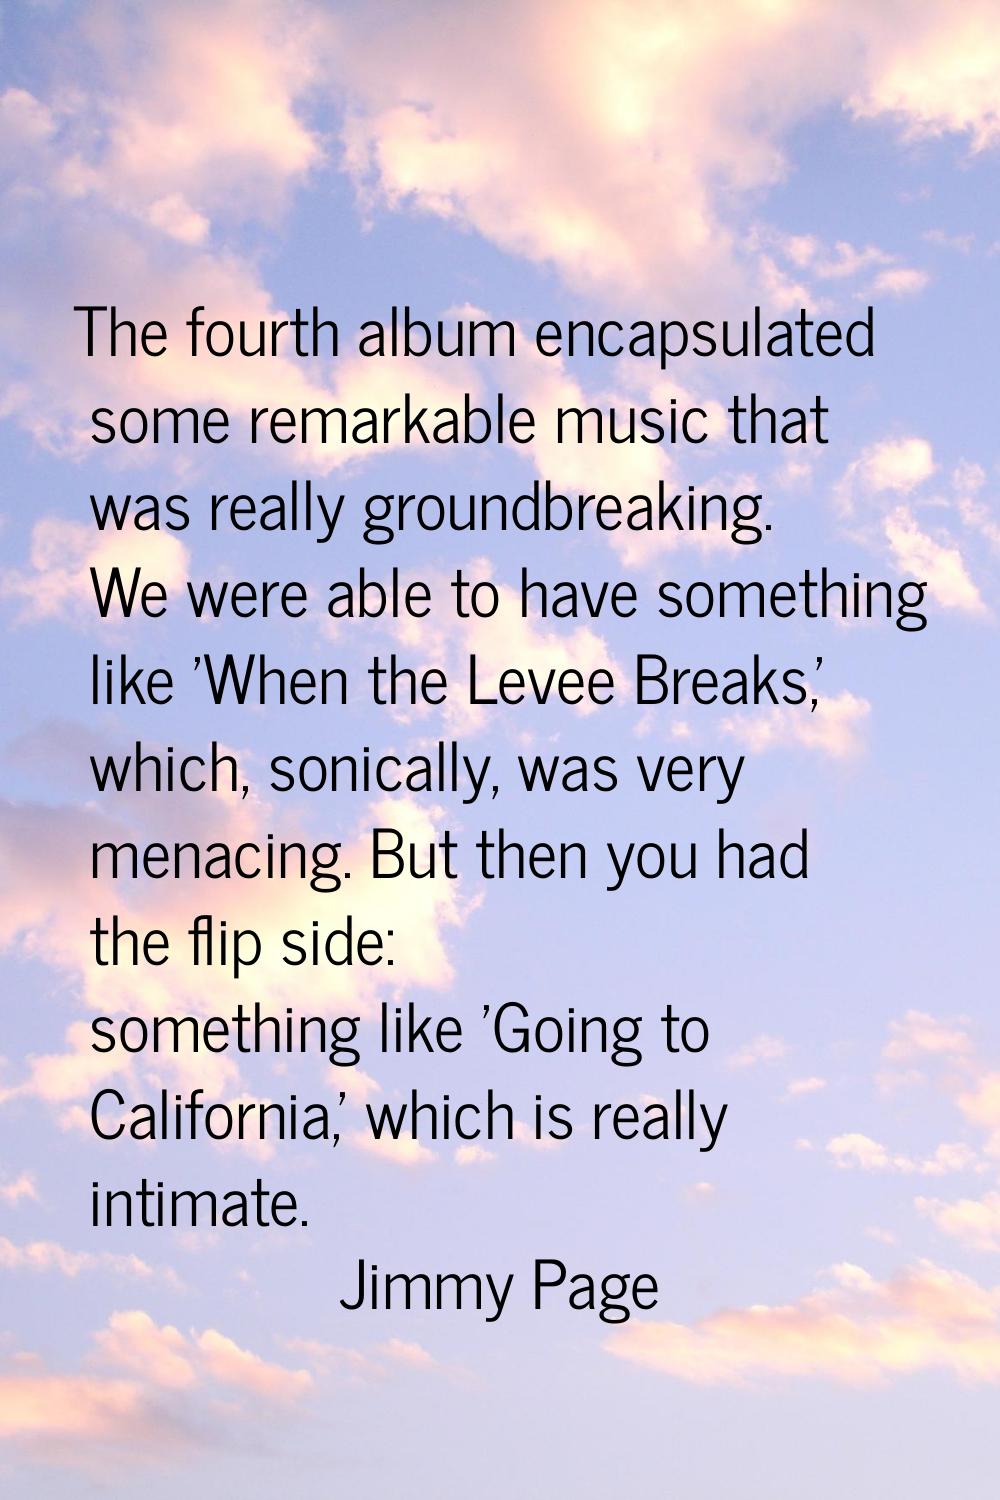 The fourth album encapsulated some remarkable music that was really groundbreaking. We were able to